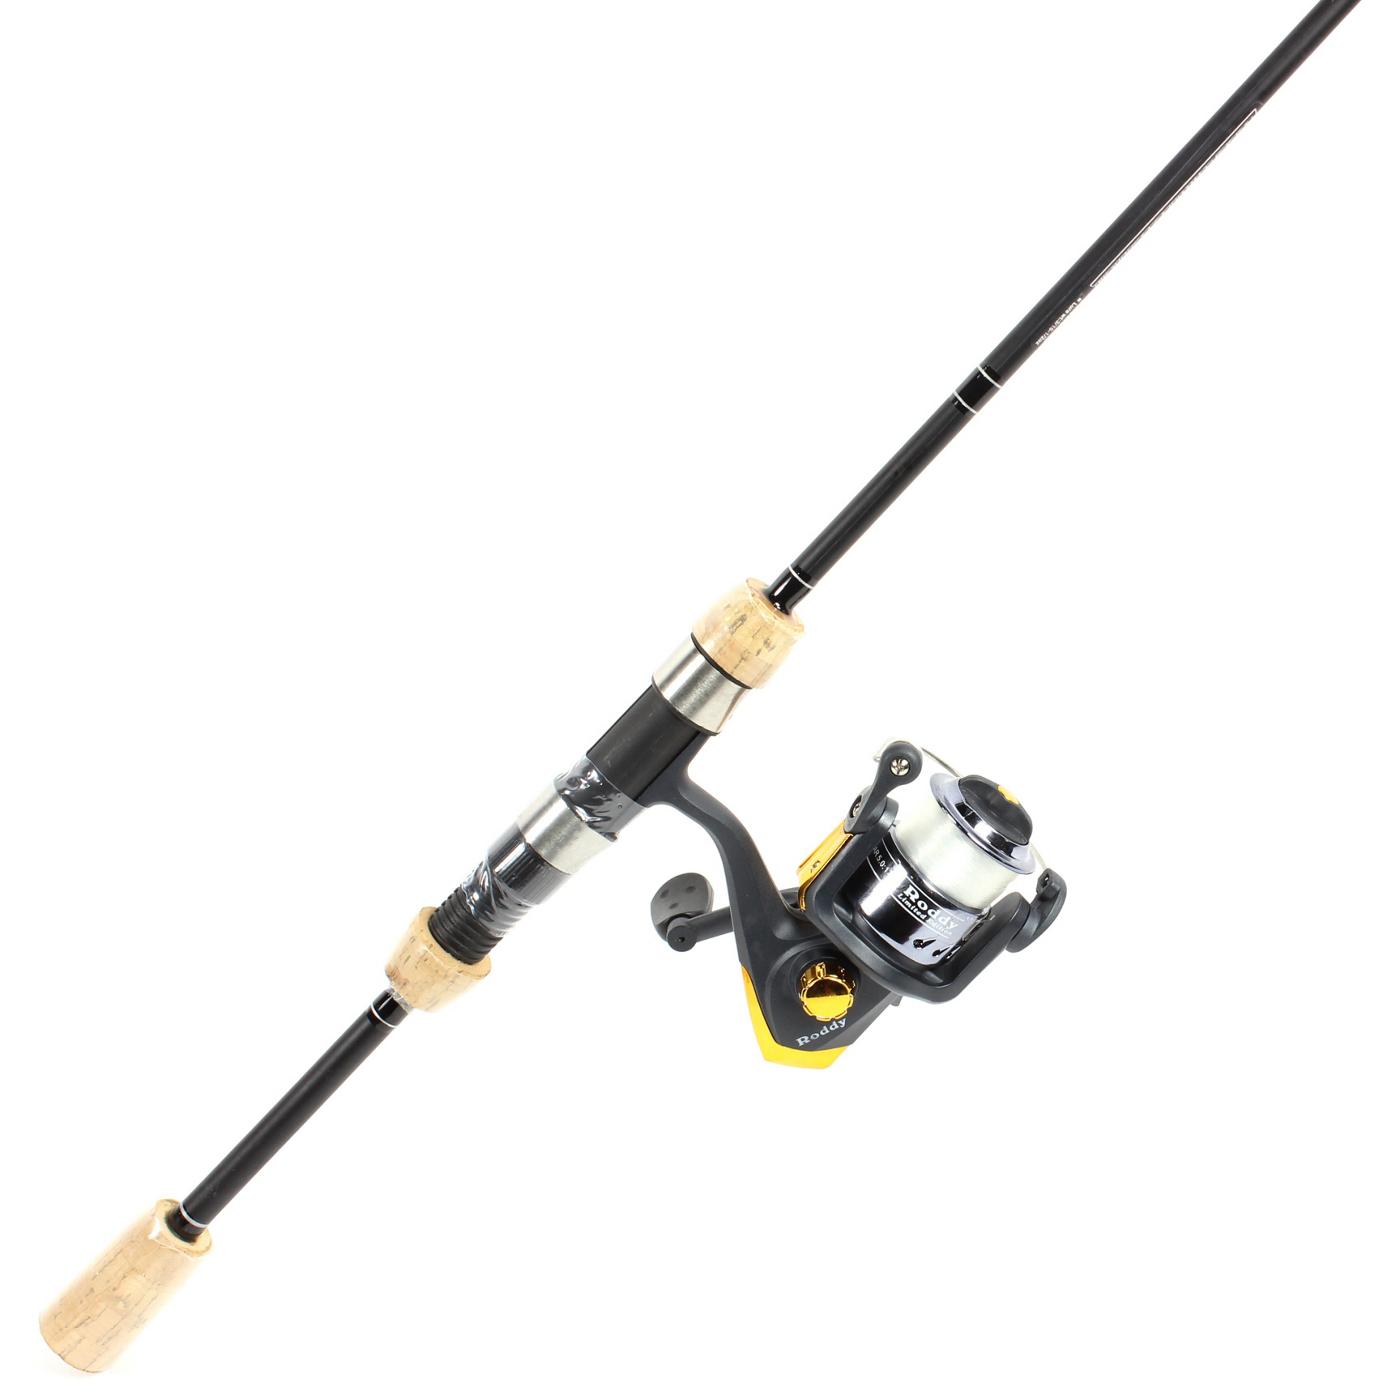 Master 6' Roddy Limited Edition Spinning Combo Rod - Shop Fishing at H-E-B